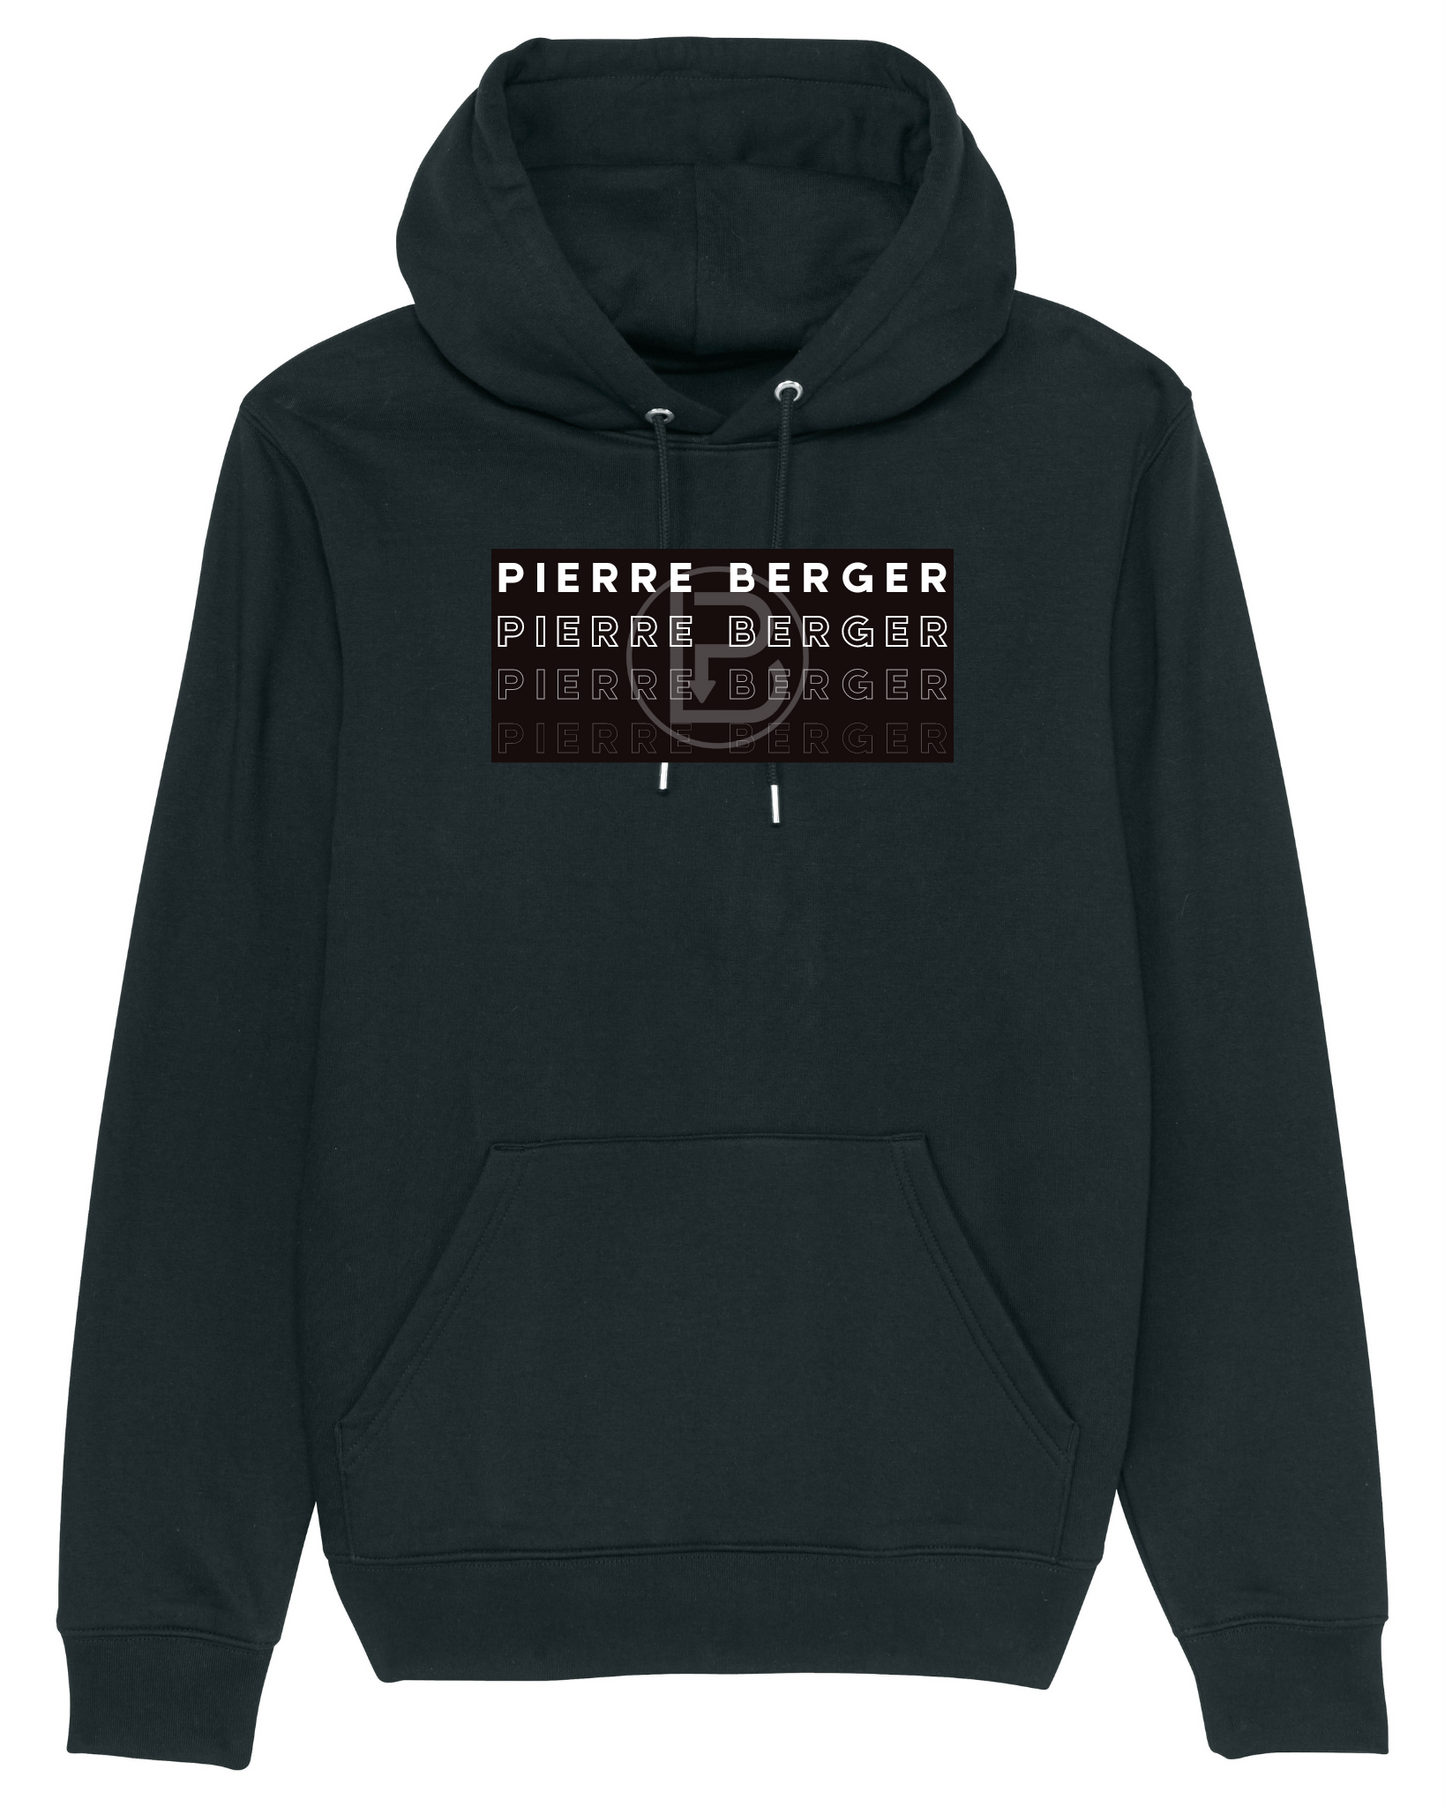 PIERRE BERGER - Unisex Hoodie Black White Simple Typhography 100% recycelt